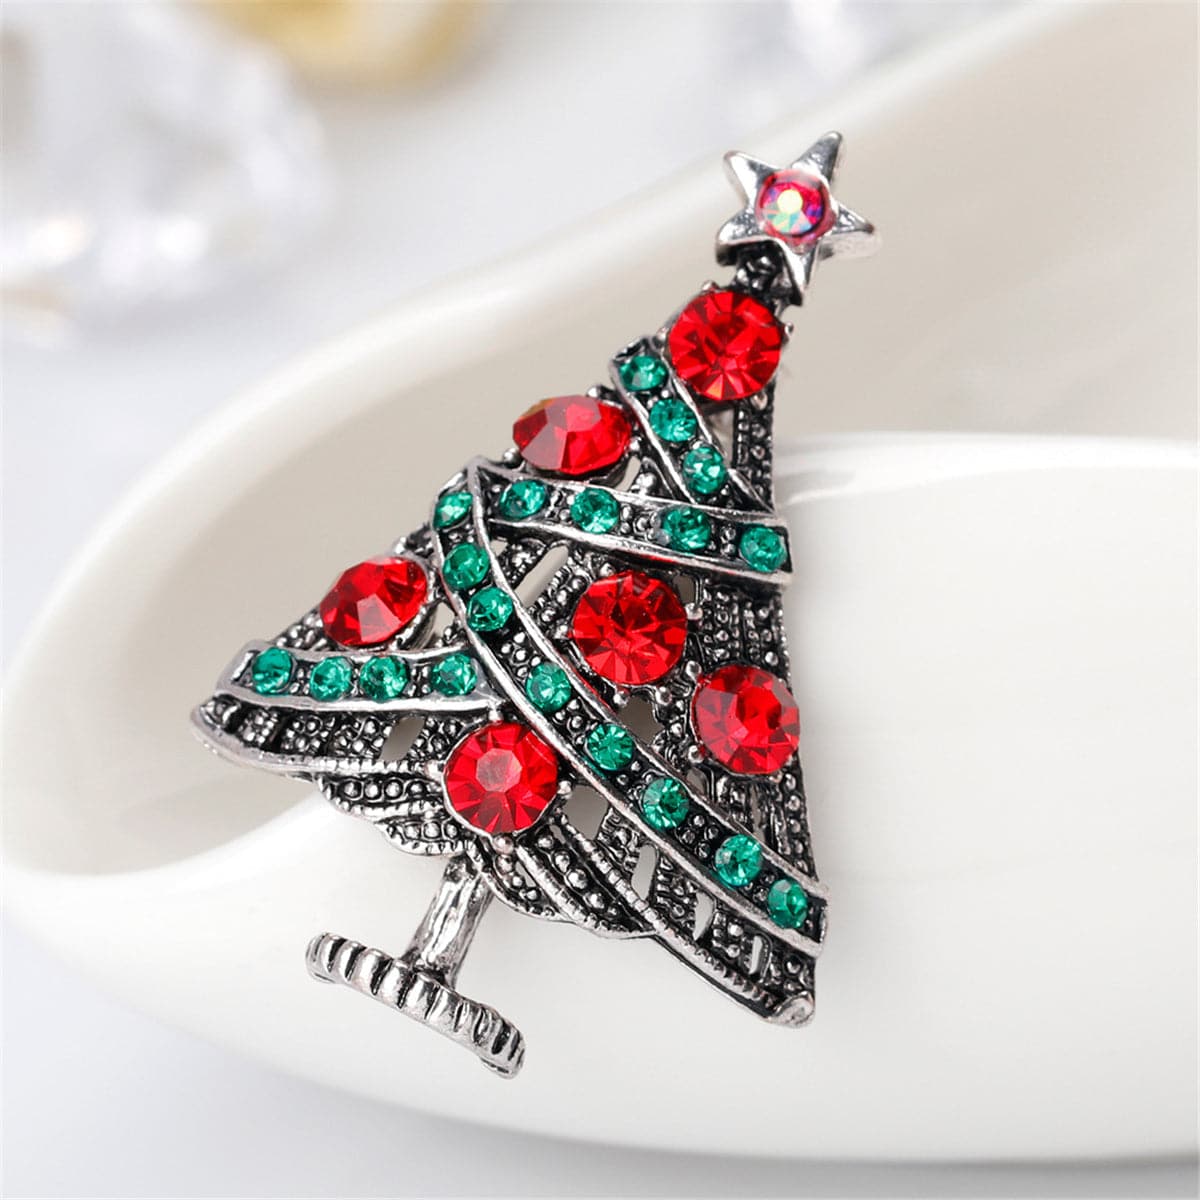 Red Cubic Zirconia & Silver-Plated Christmas Tree Brooch